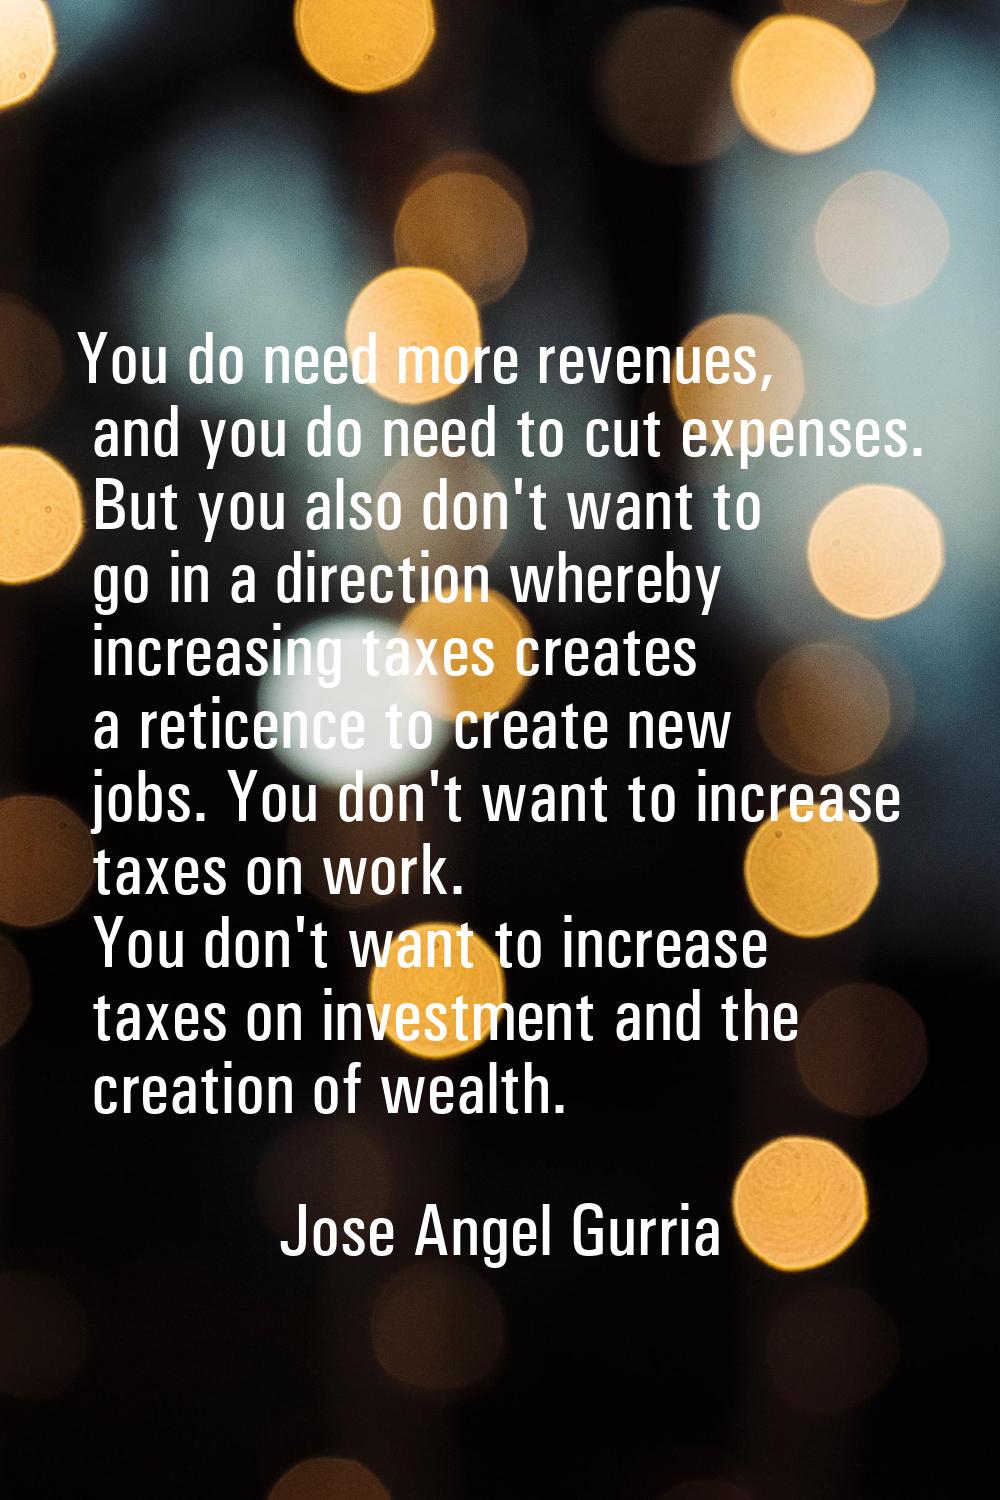 You do need more revenues, and you do need to cut expenses. But you also don't want to go in a dire